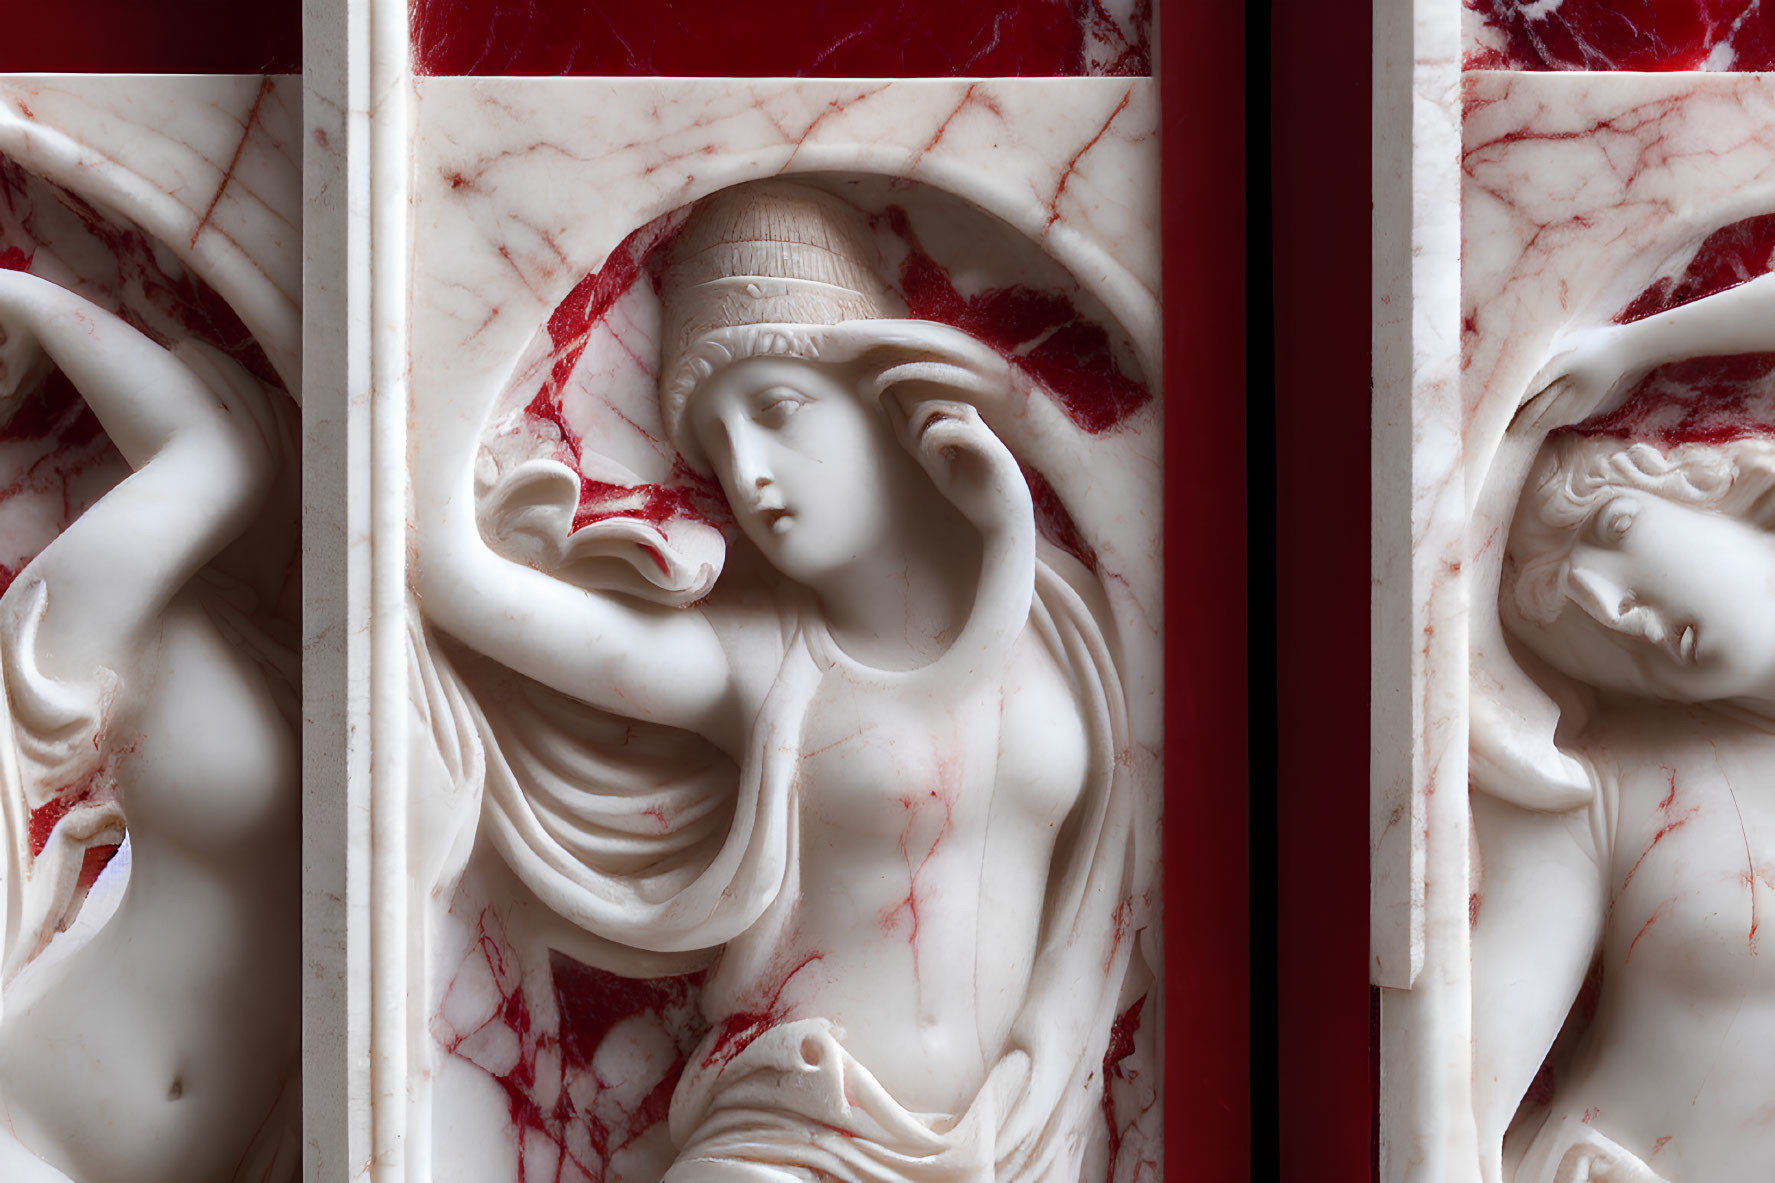 Marble bas-relief of elegant female figures with red marble columns